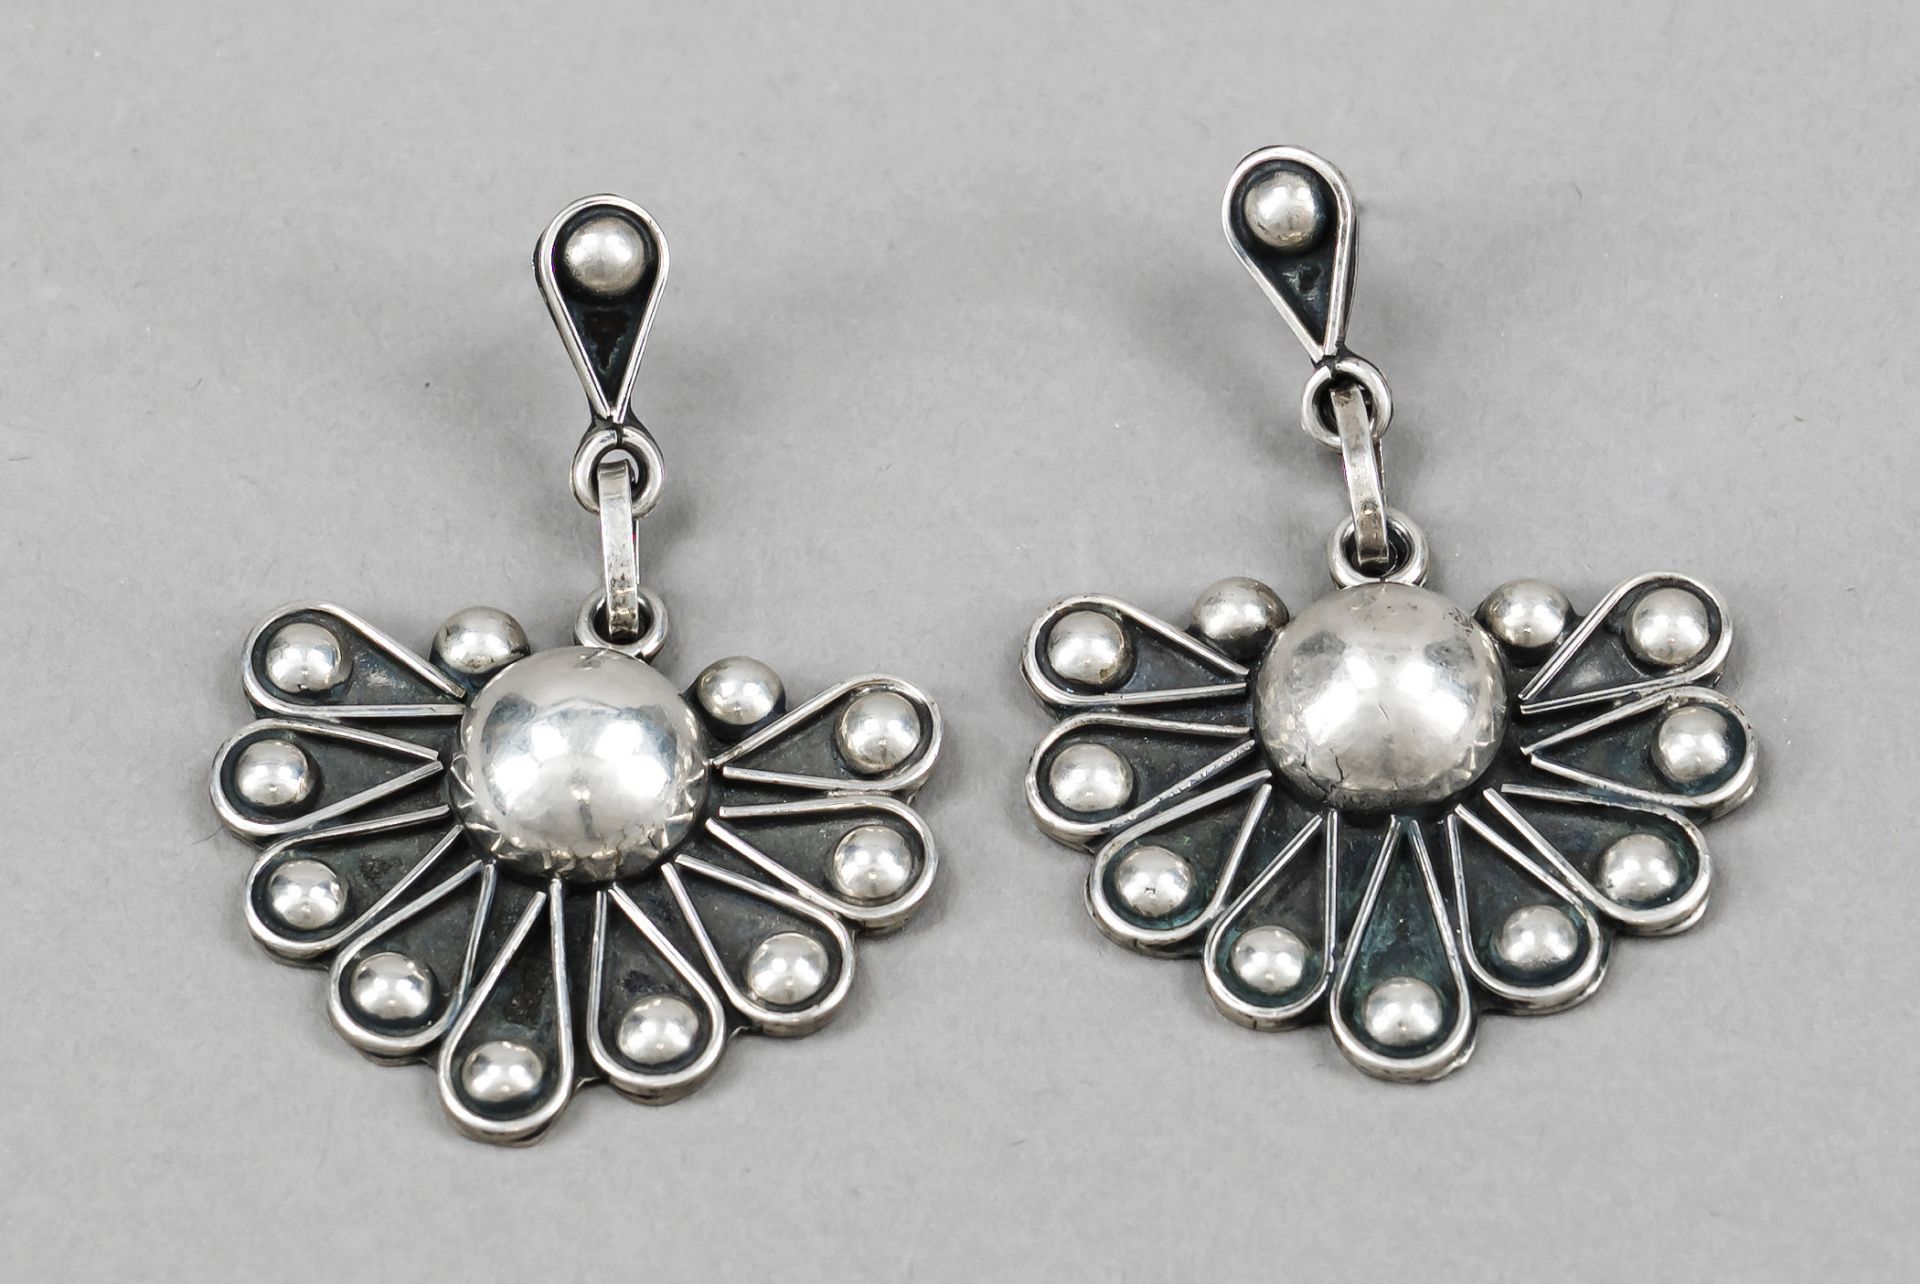 Pair of earrings, Mexico, 20th century, sterling silver 925/000, flower shape, w. 4 cm, approx. 28